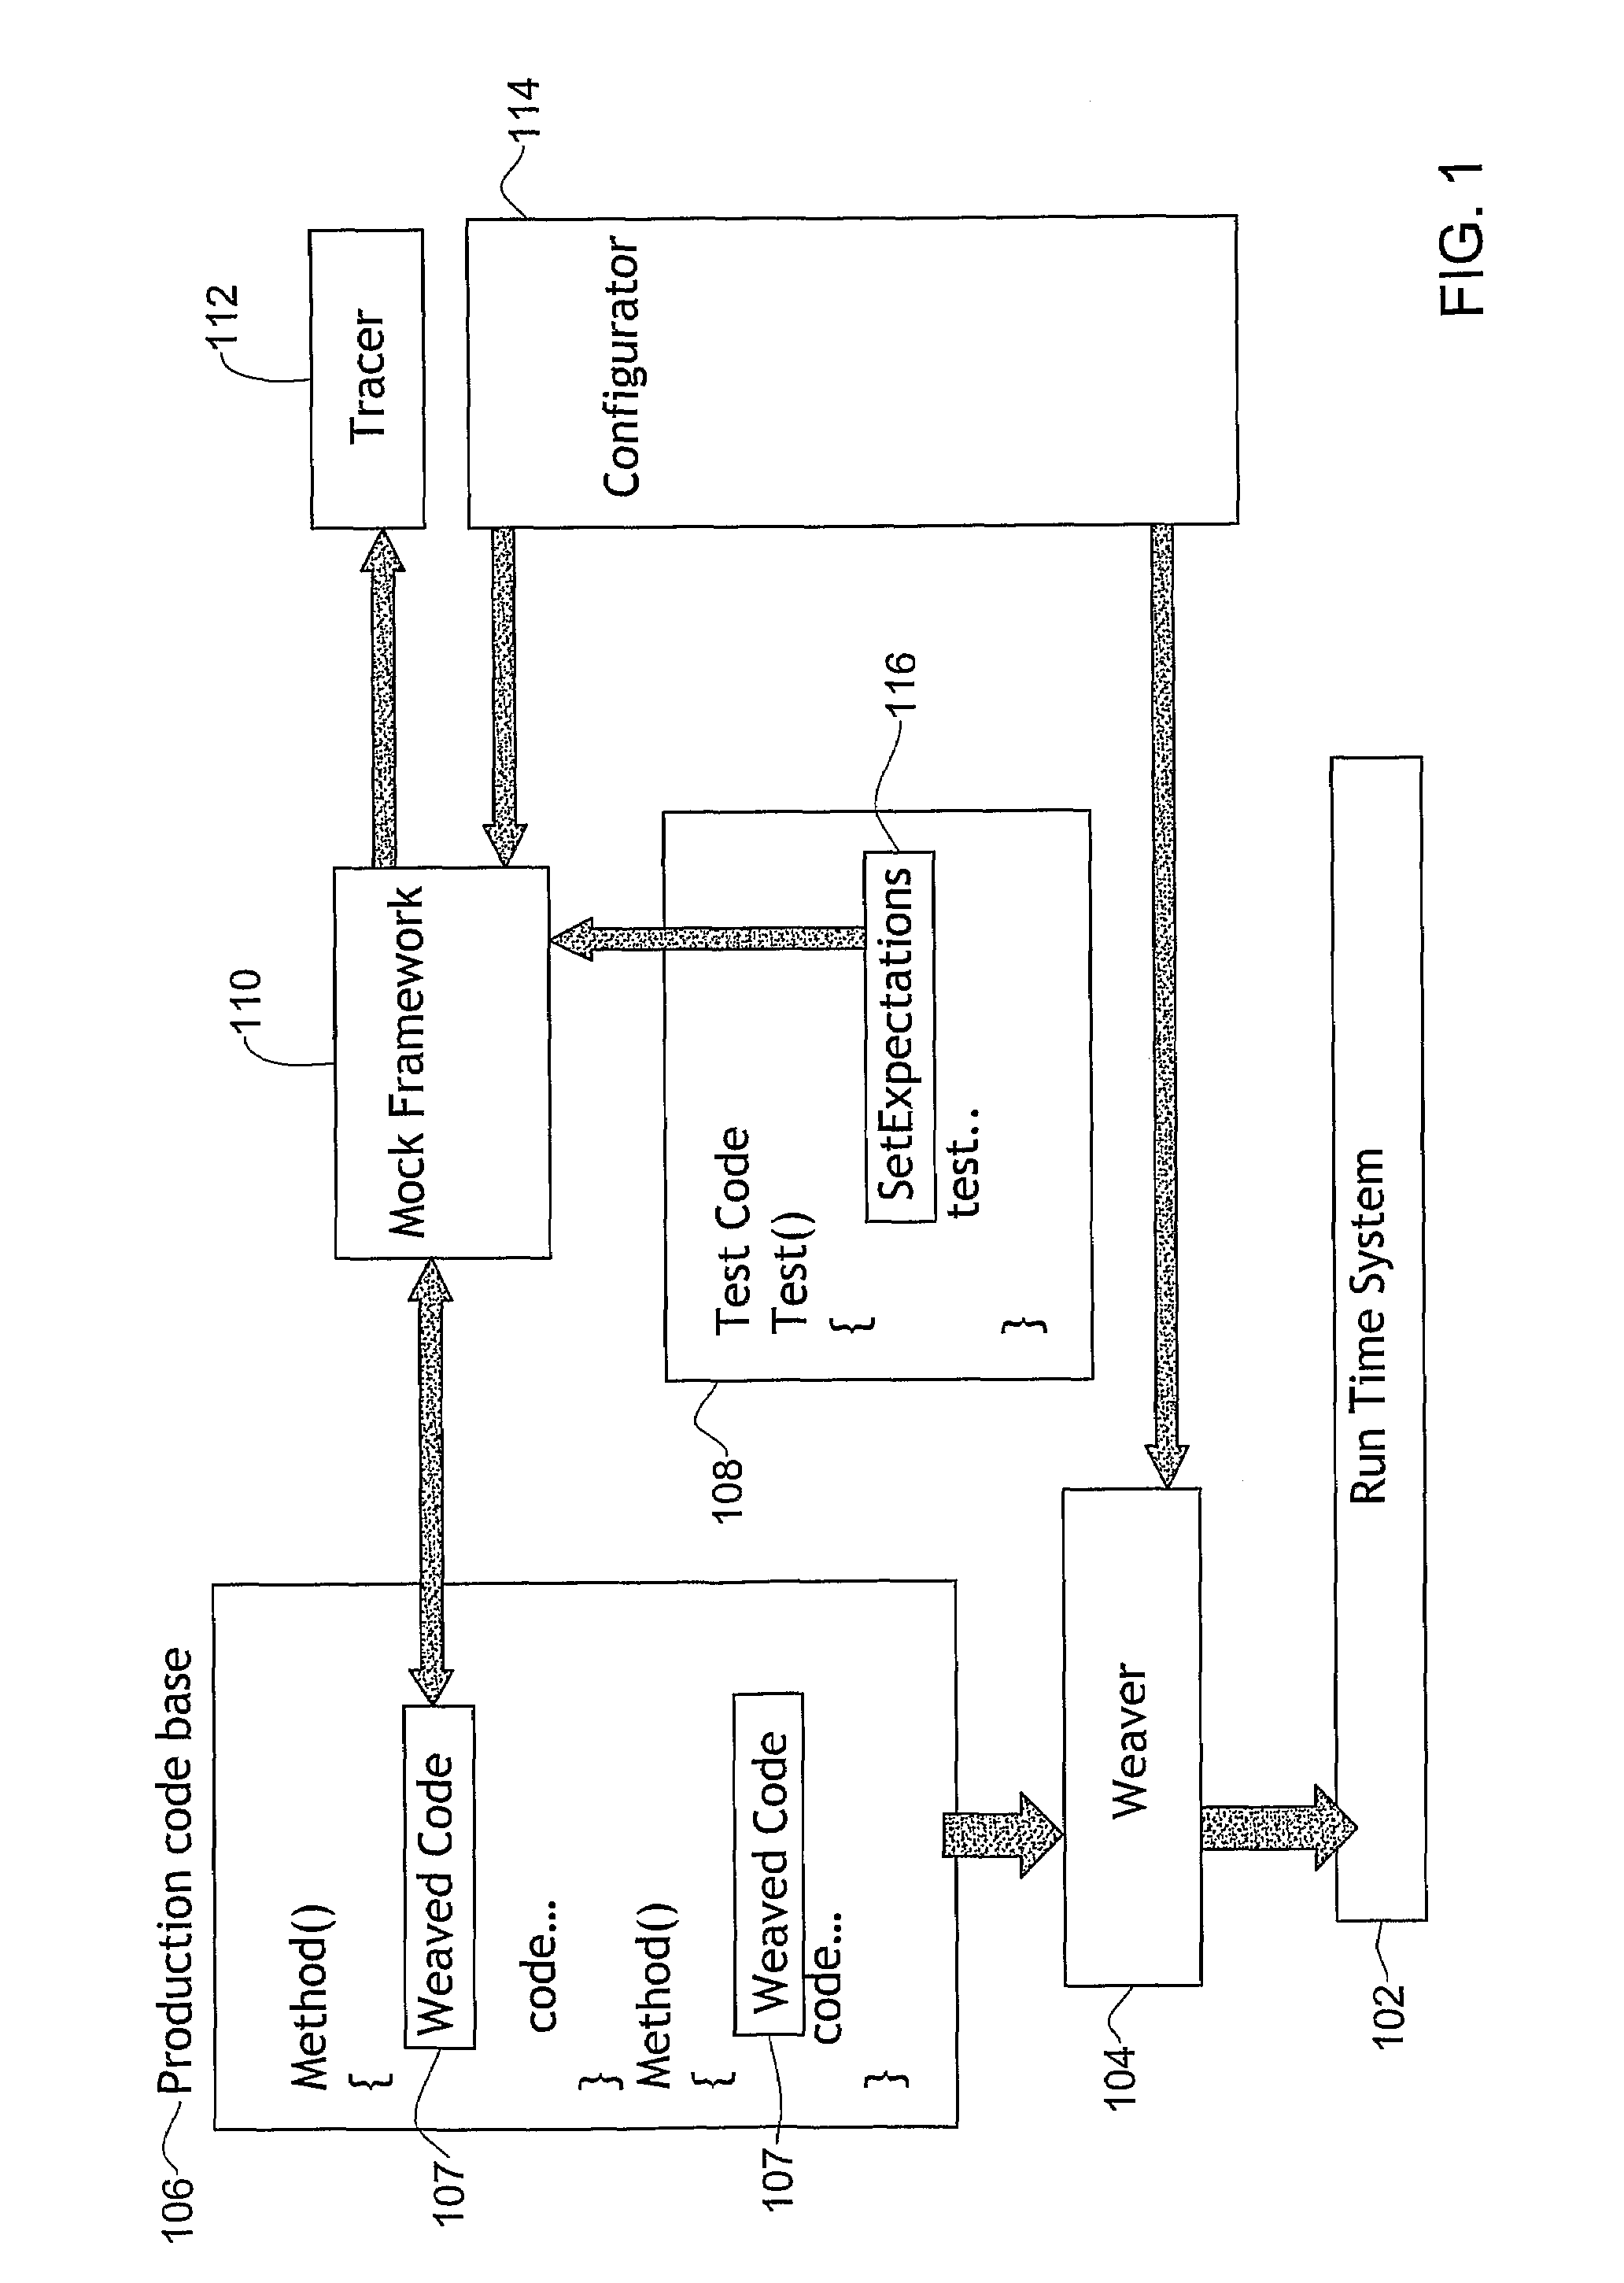 Method and system for isolating software components